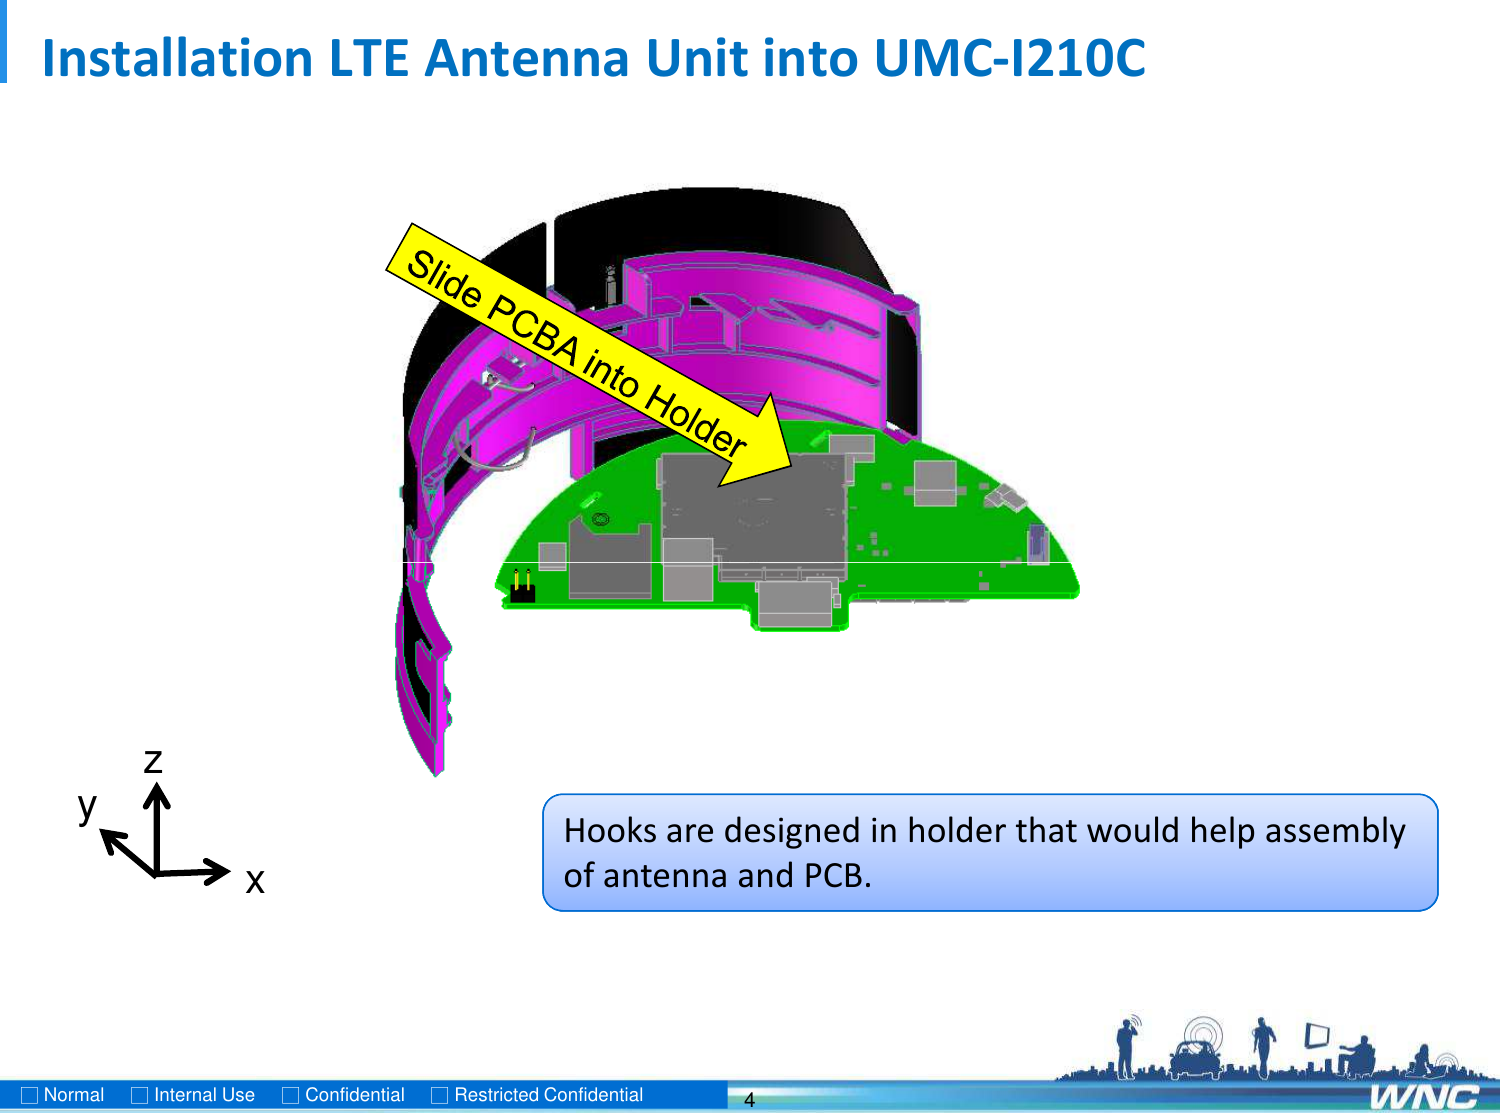 Installation LTE Antenna Unit into UMC-I210C4□Normal     □Internal Use  □Confidential  □Restricted ConfidentialxyzHooks are designed in holder that would help assembly of antenna and PCB. 